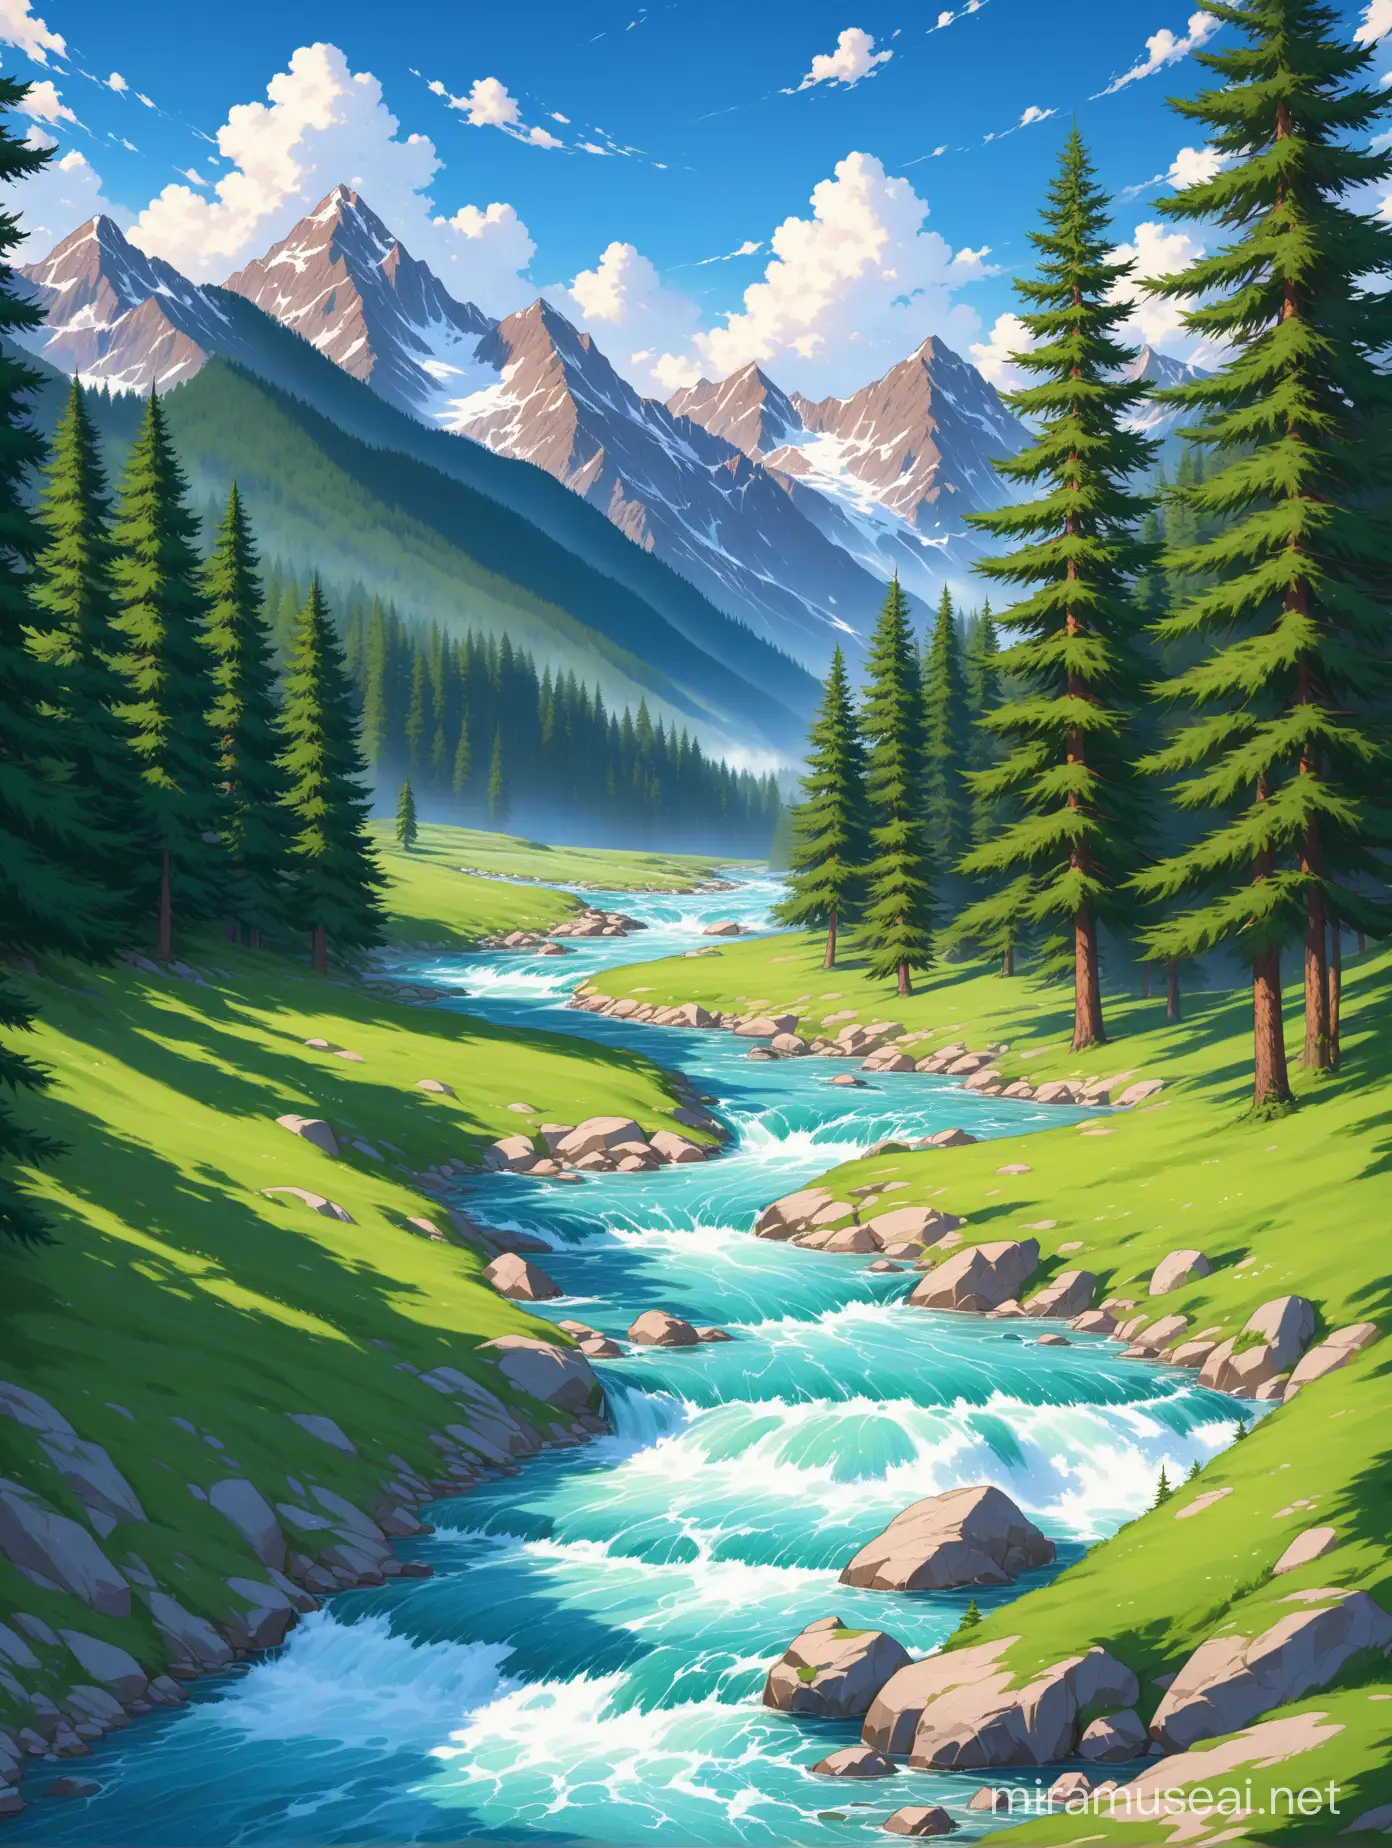 Stunning Mountain Forest Landscape with Torrent and Majestic Peaks